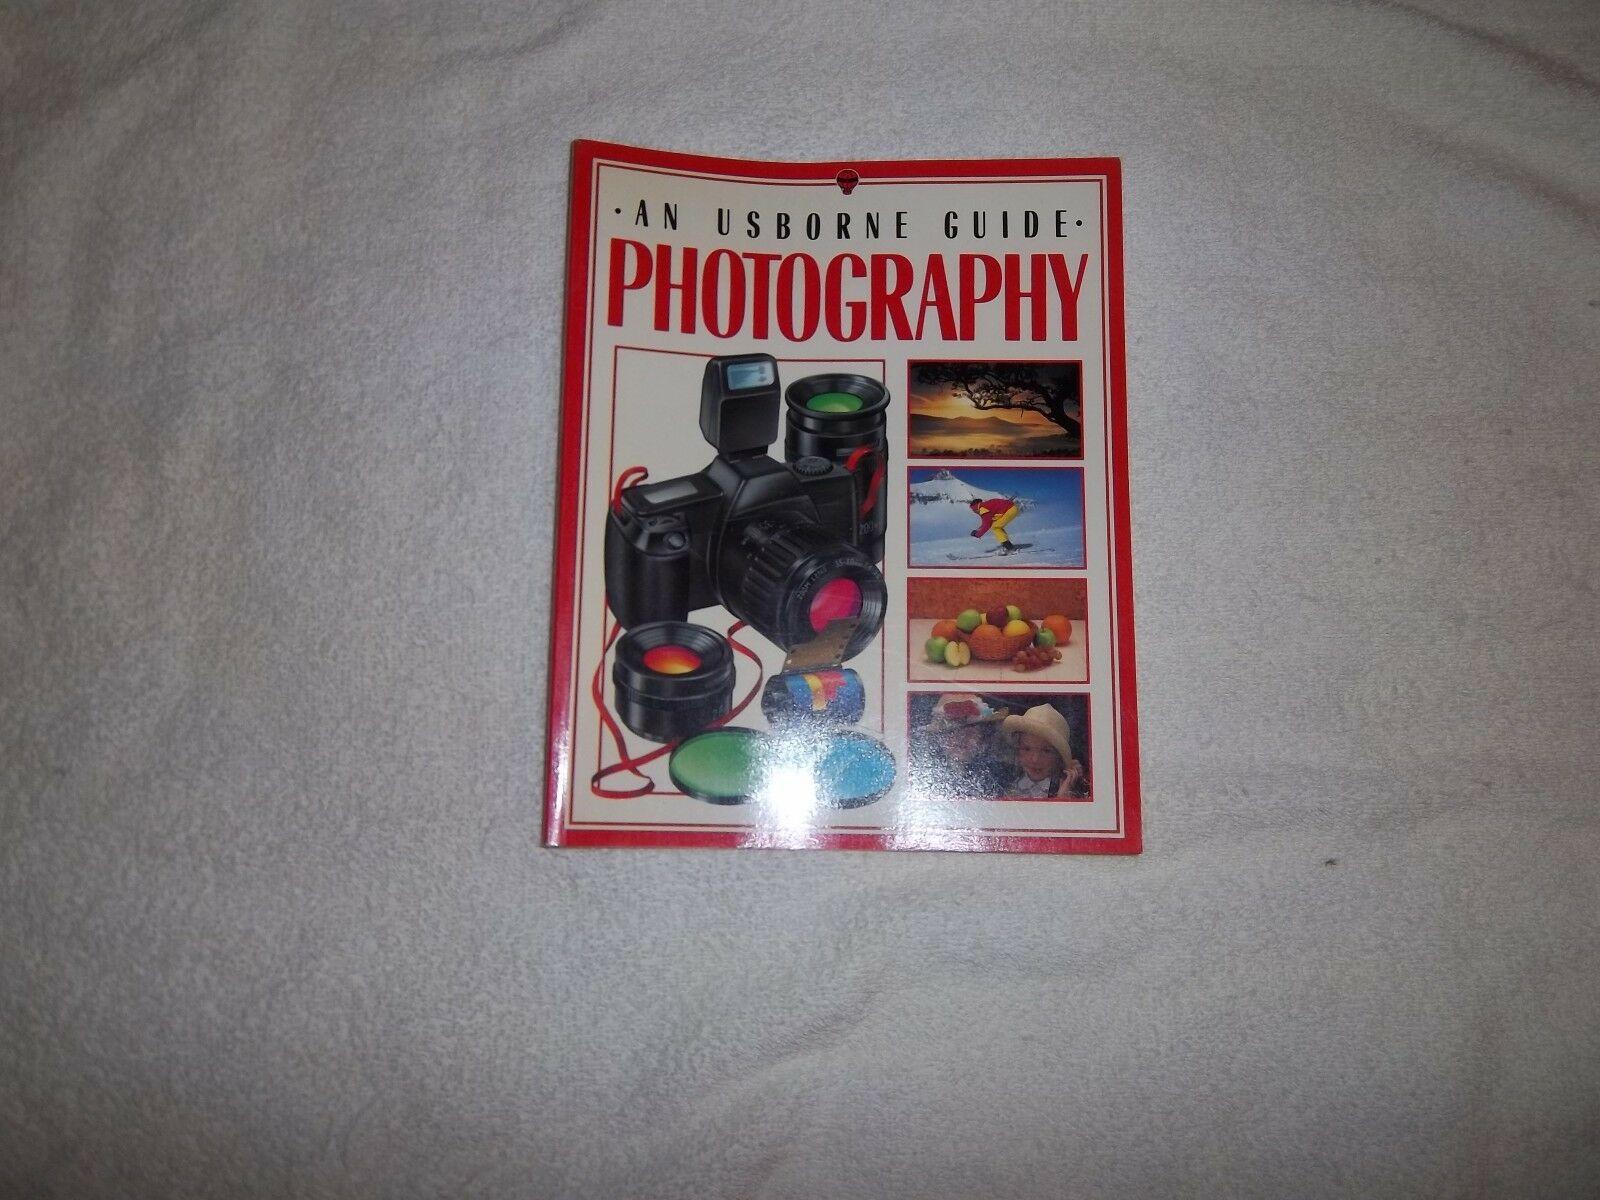 PHOTOGRAPHY-AN USBORNE GUIDE (PAPER BACK)